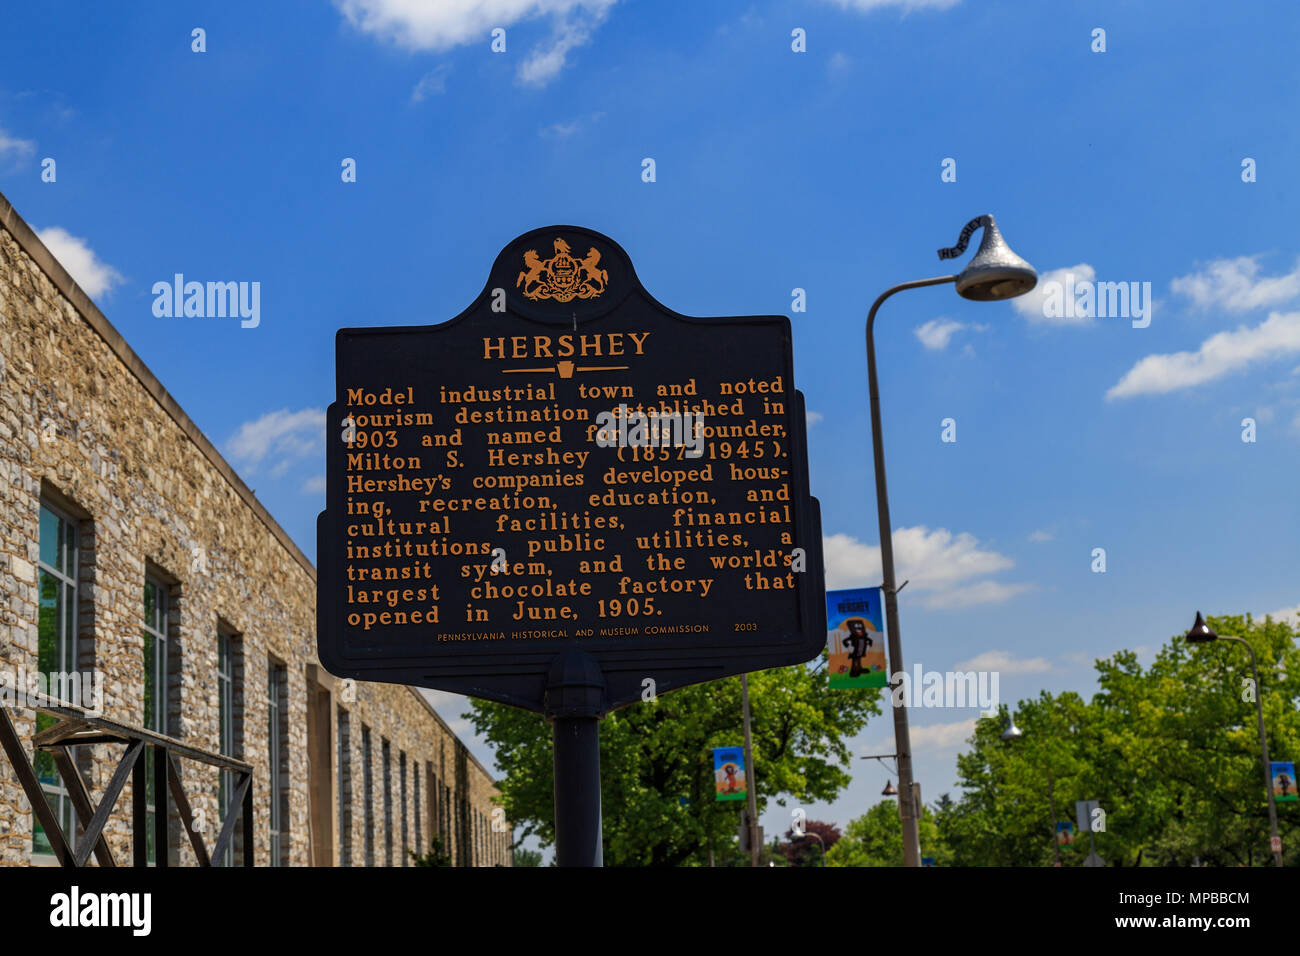 Hershey, PA, USA - May 21, 2018: An historical marker sign stands in front of the Hershey Chocolate Factory. Stock Photo